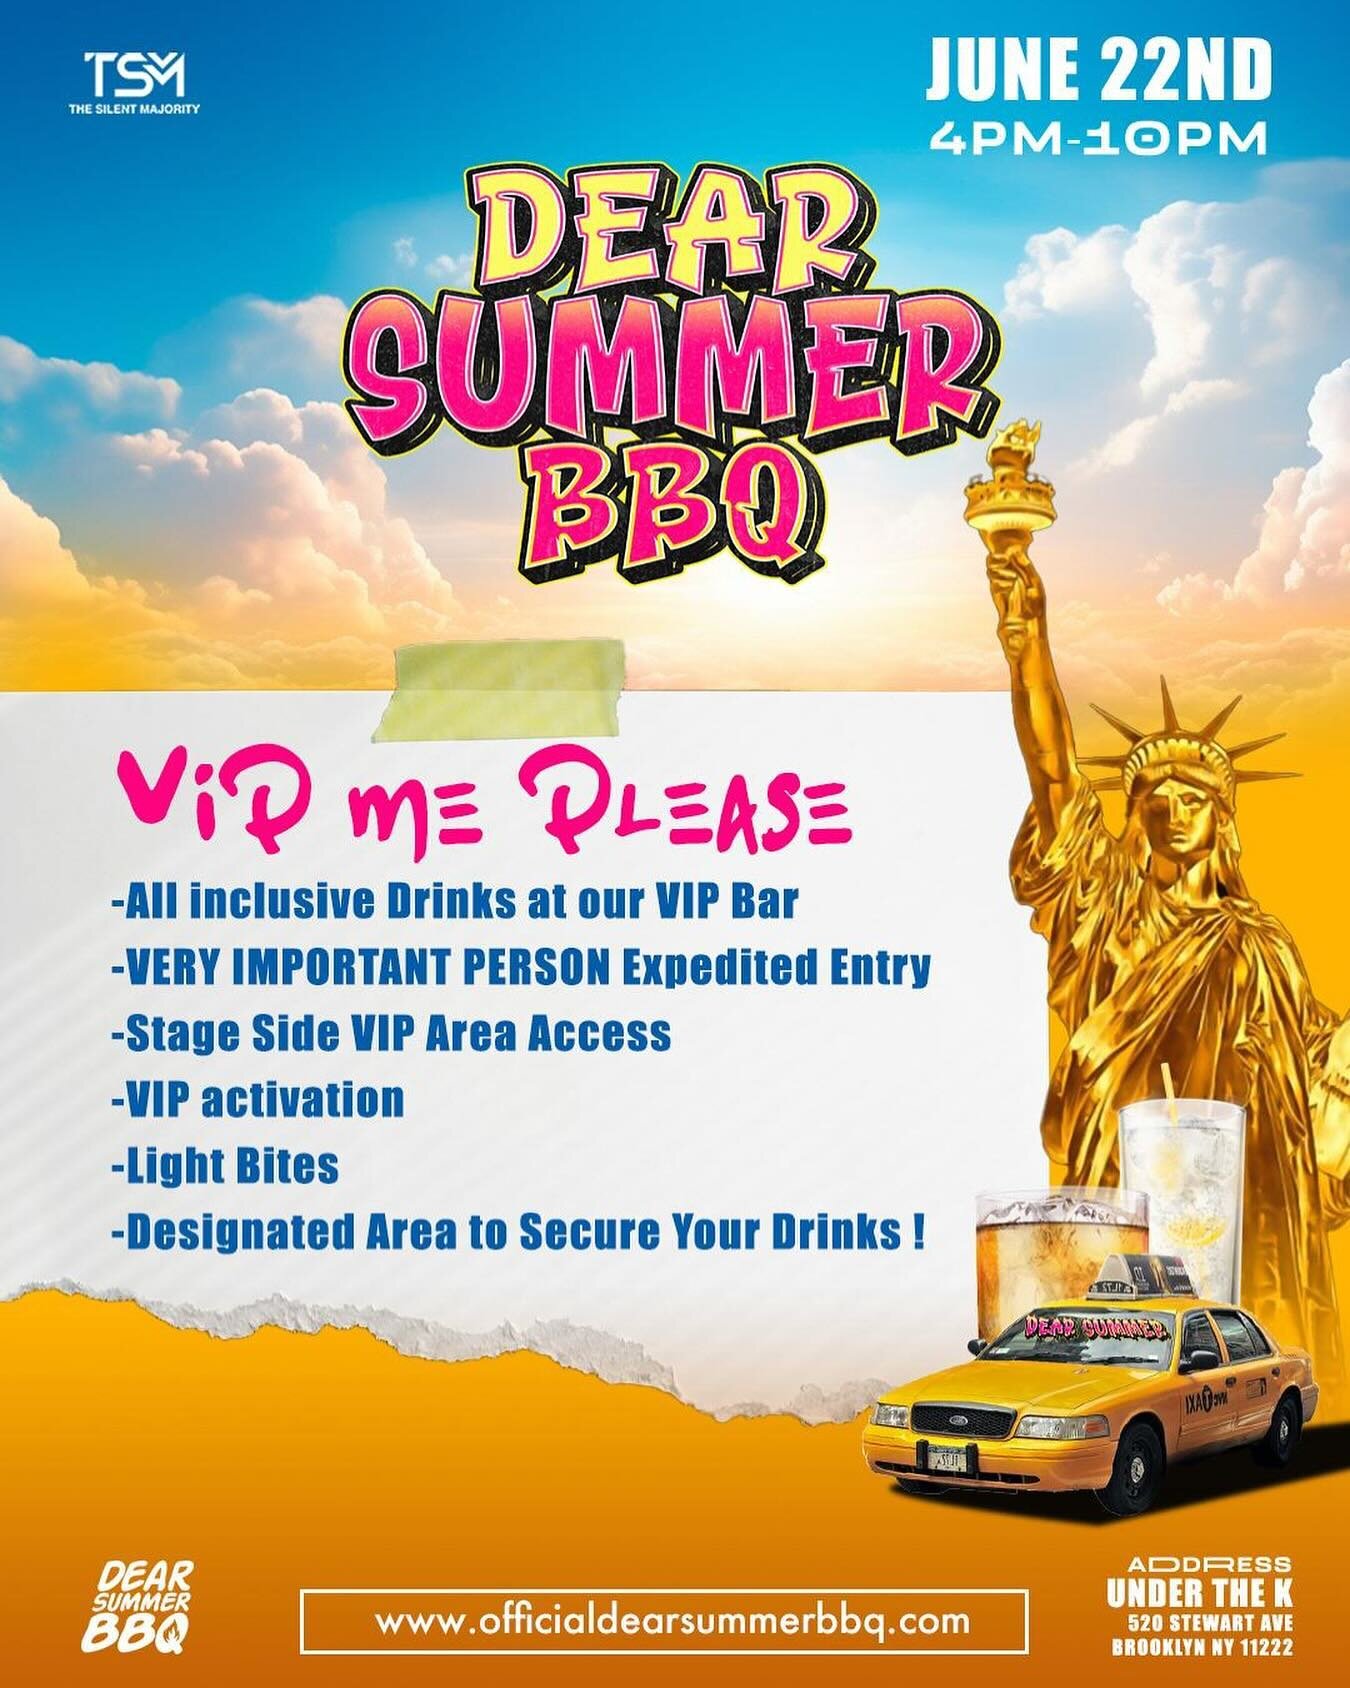 VIP Me Please‼️

Summer Starts When We Say So‼️

See You There ✌🏾

#DearSummerBBQ #SummerVibes #HBCU #bbq